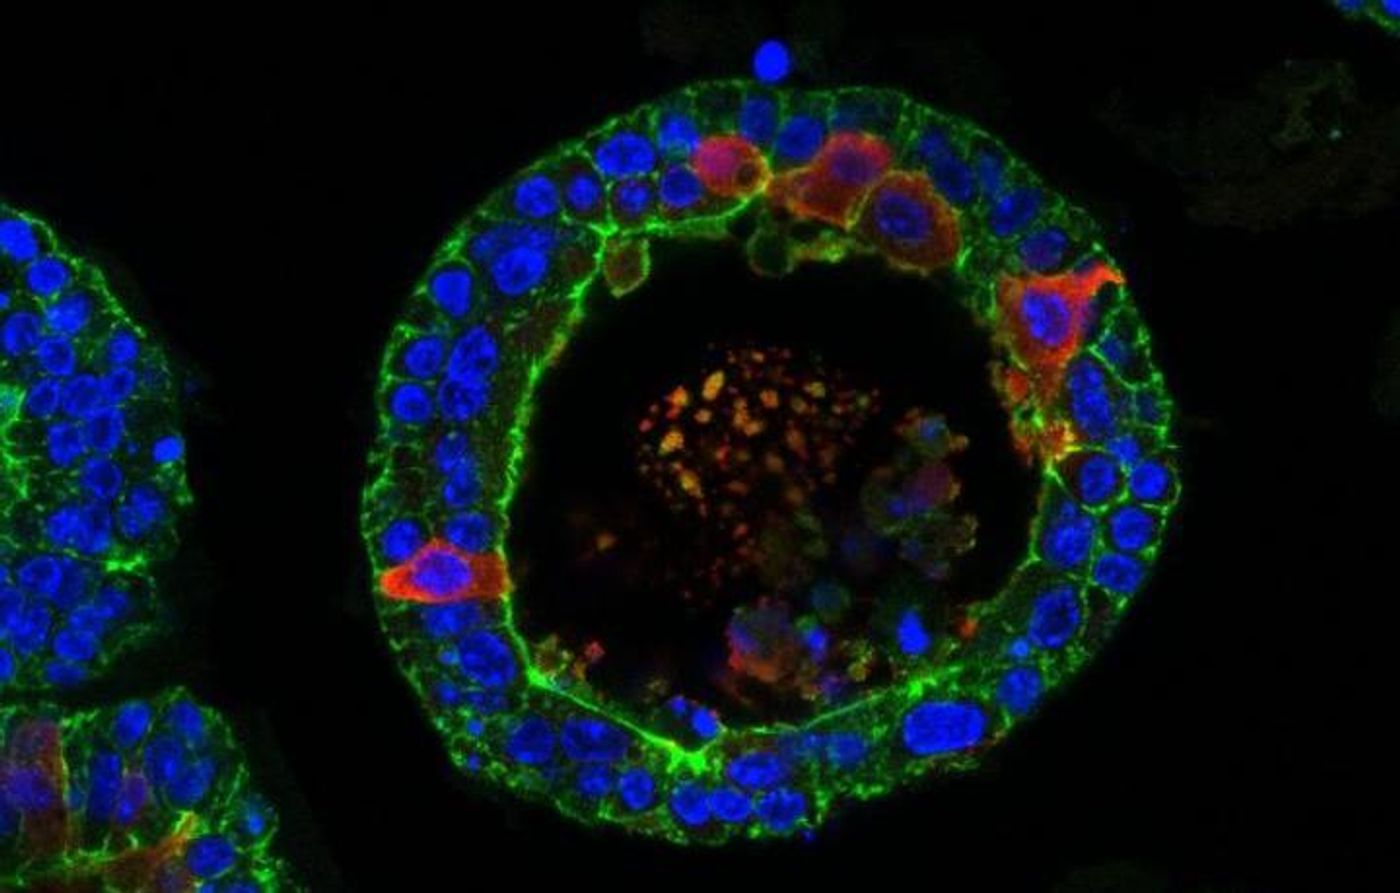 Lipocalin 2 (in red) is a tear component that is made by the organoids. / Credit: Yorick Post, copyright Elsevier